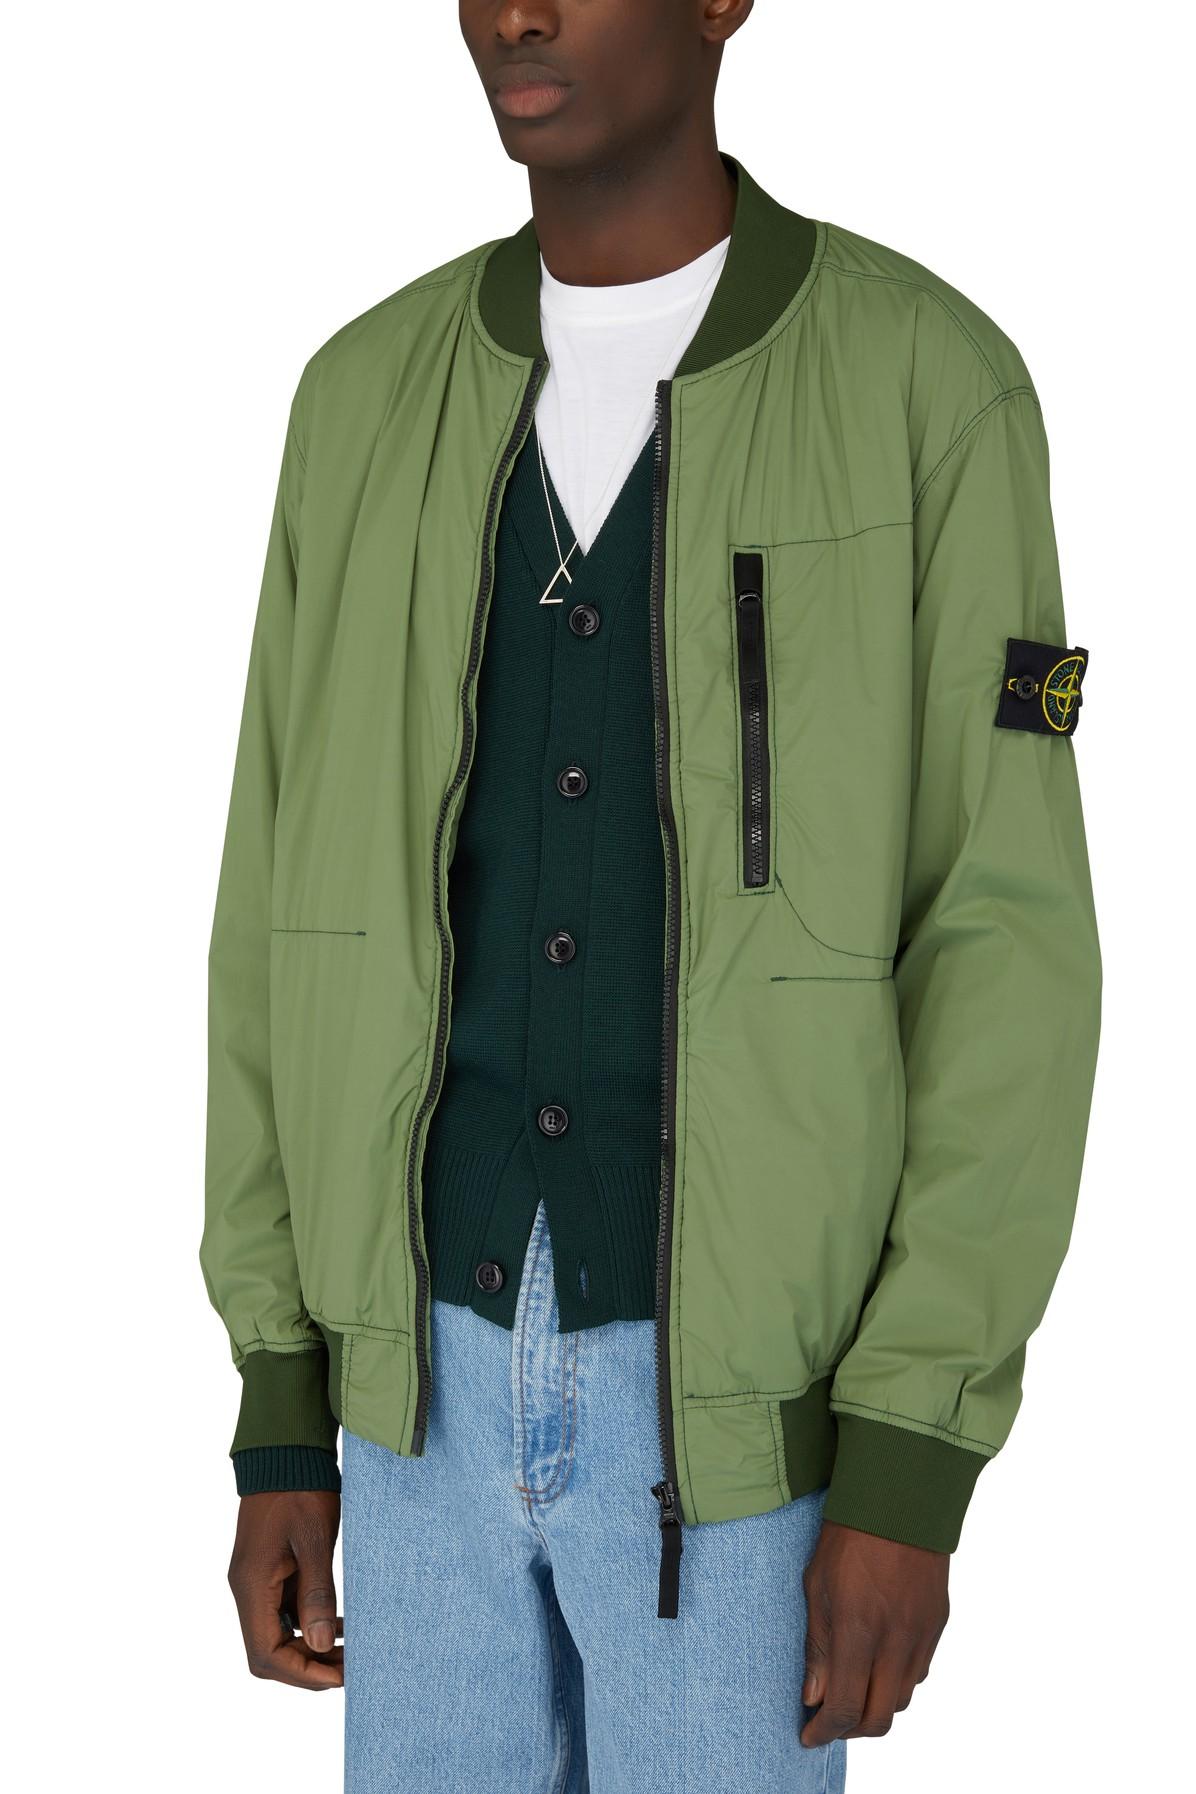 Stone Island Bomber Jacket in Green for Men | Lyst